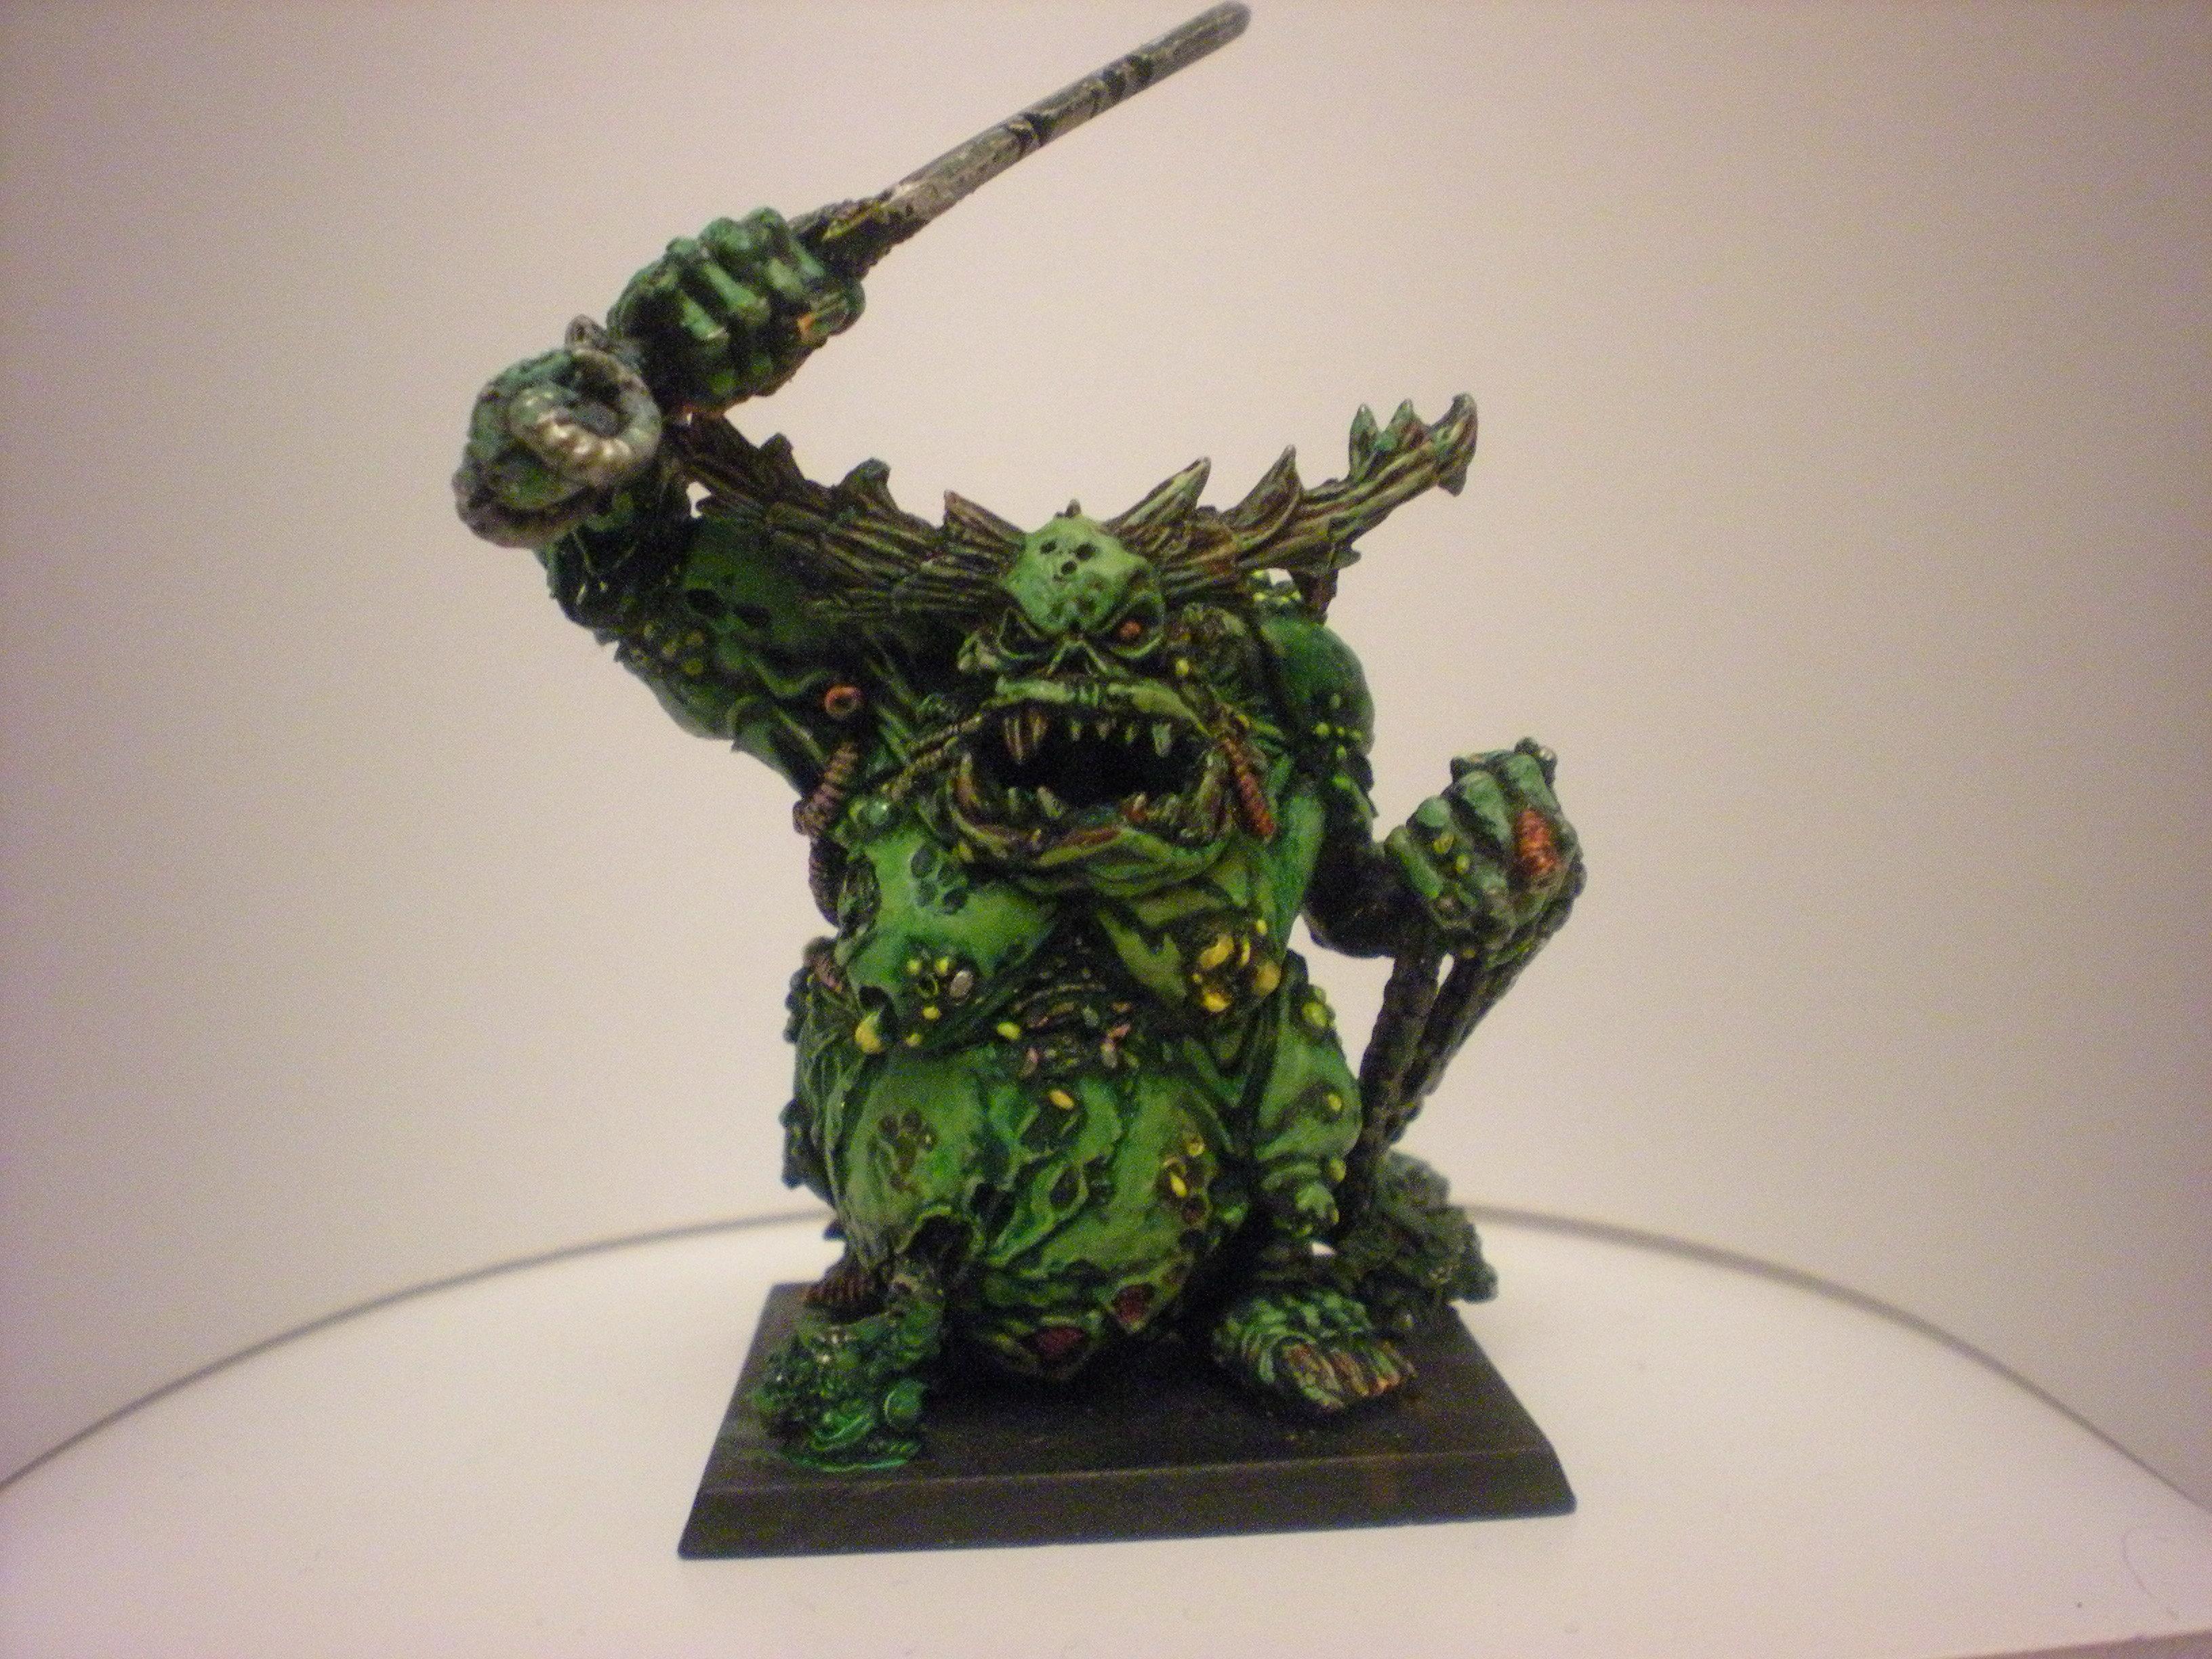 GUO, finished at last